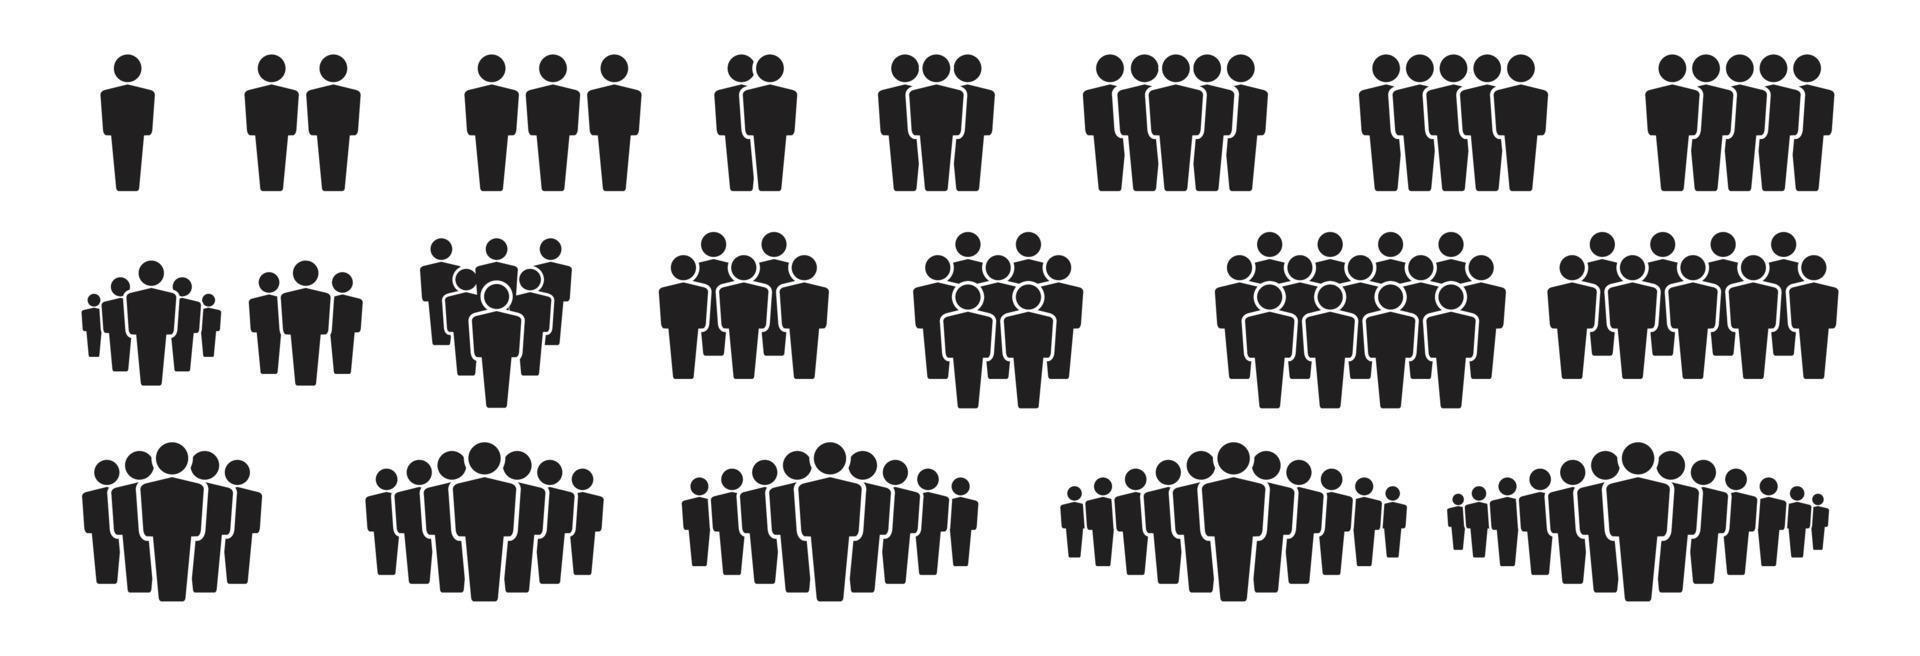 Team icons set. People .Group of people icons. Vector illustration